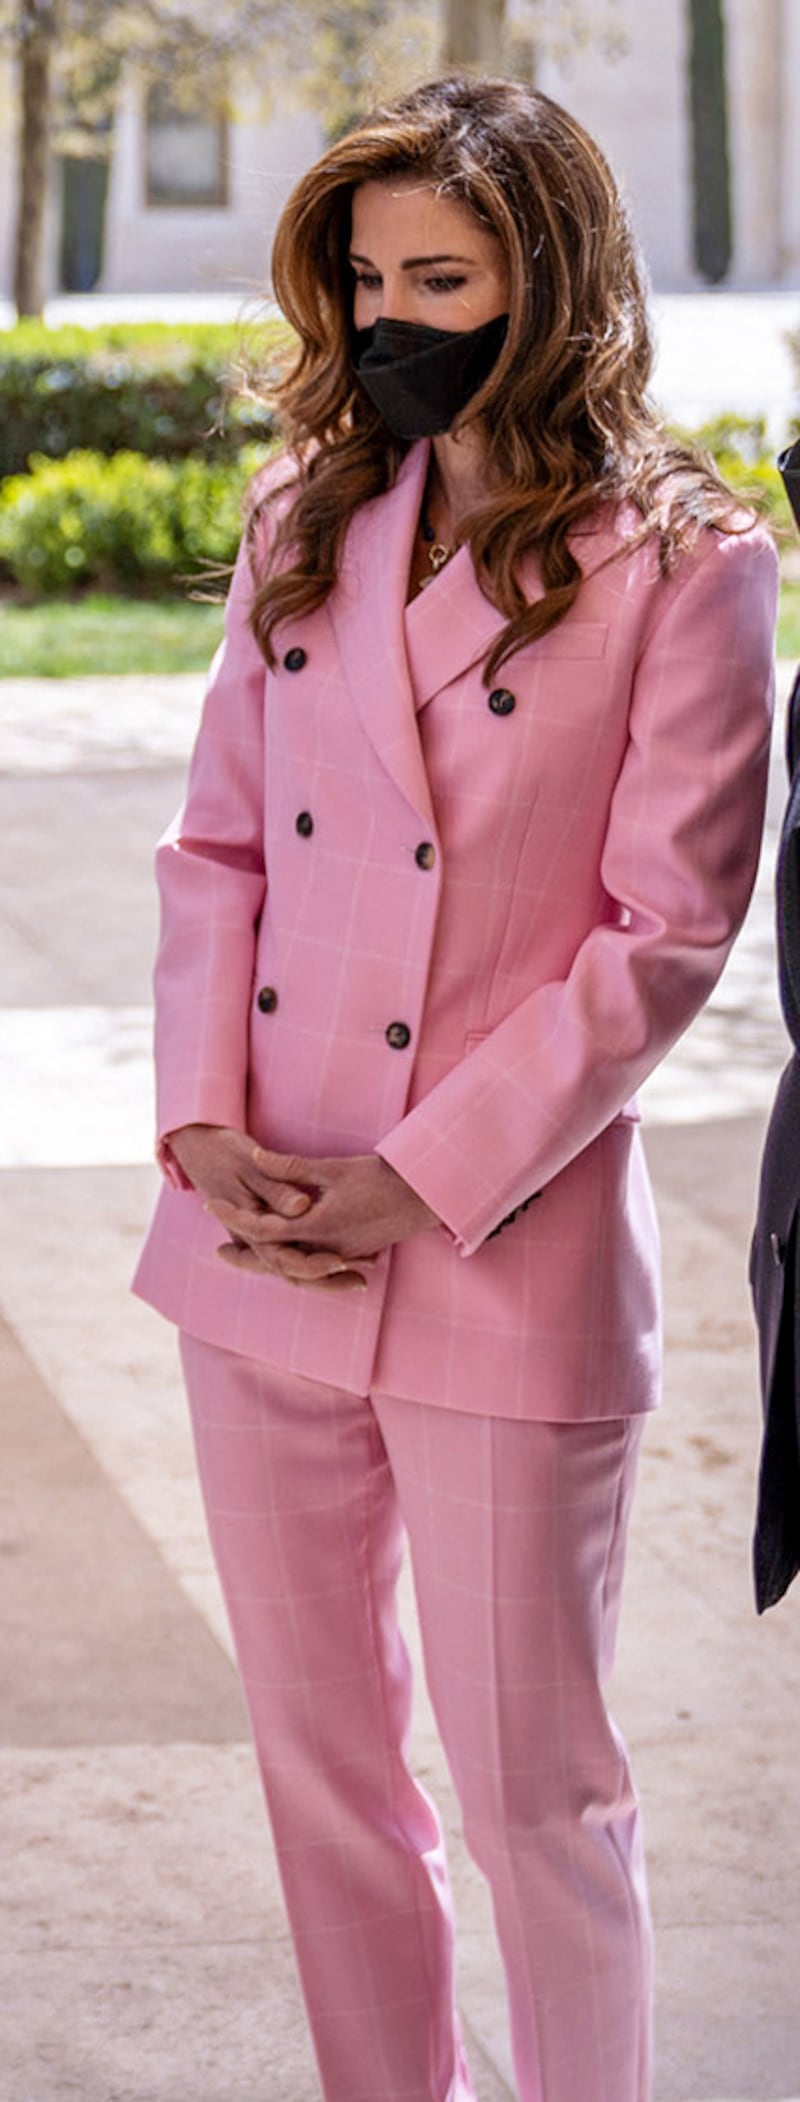 Queen Rania, wearing pink Calvin Klein, during a visit to one of the projects of the Productive Youth Initiative in Amman, Jordan on March 30, 2021. AFP